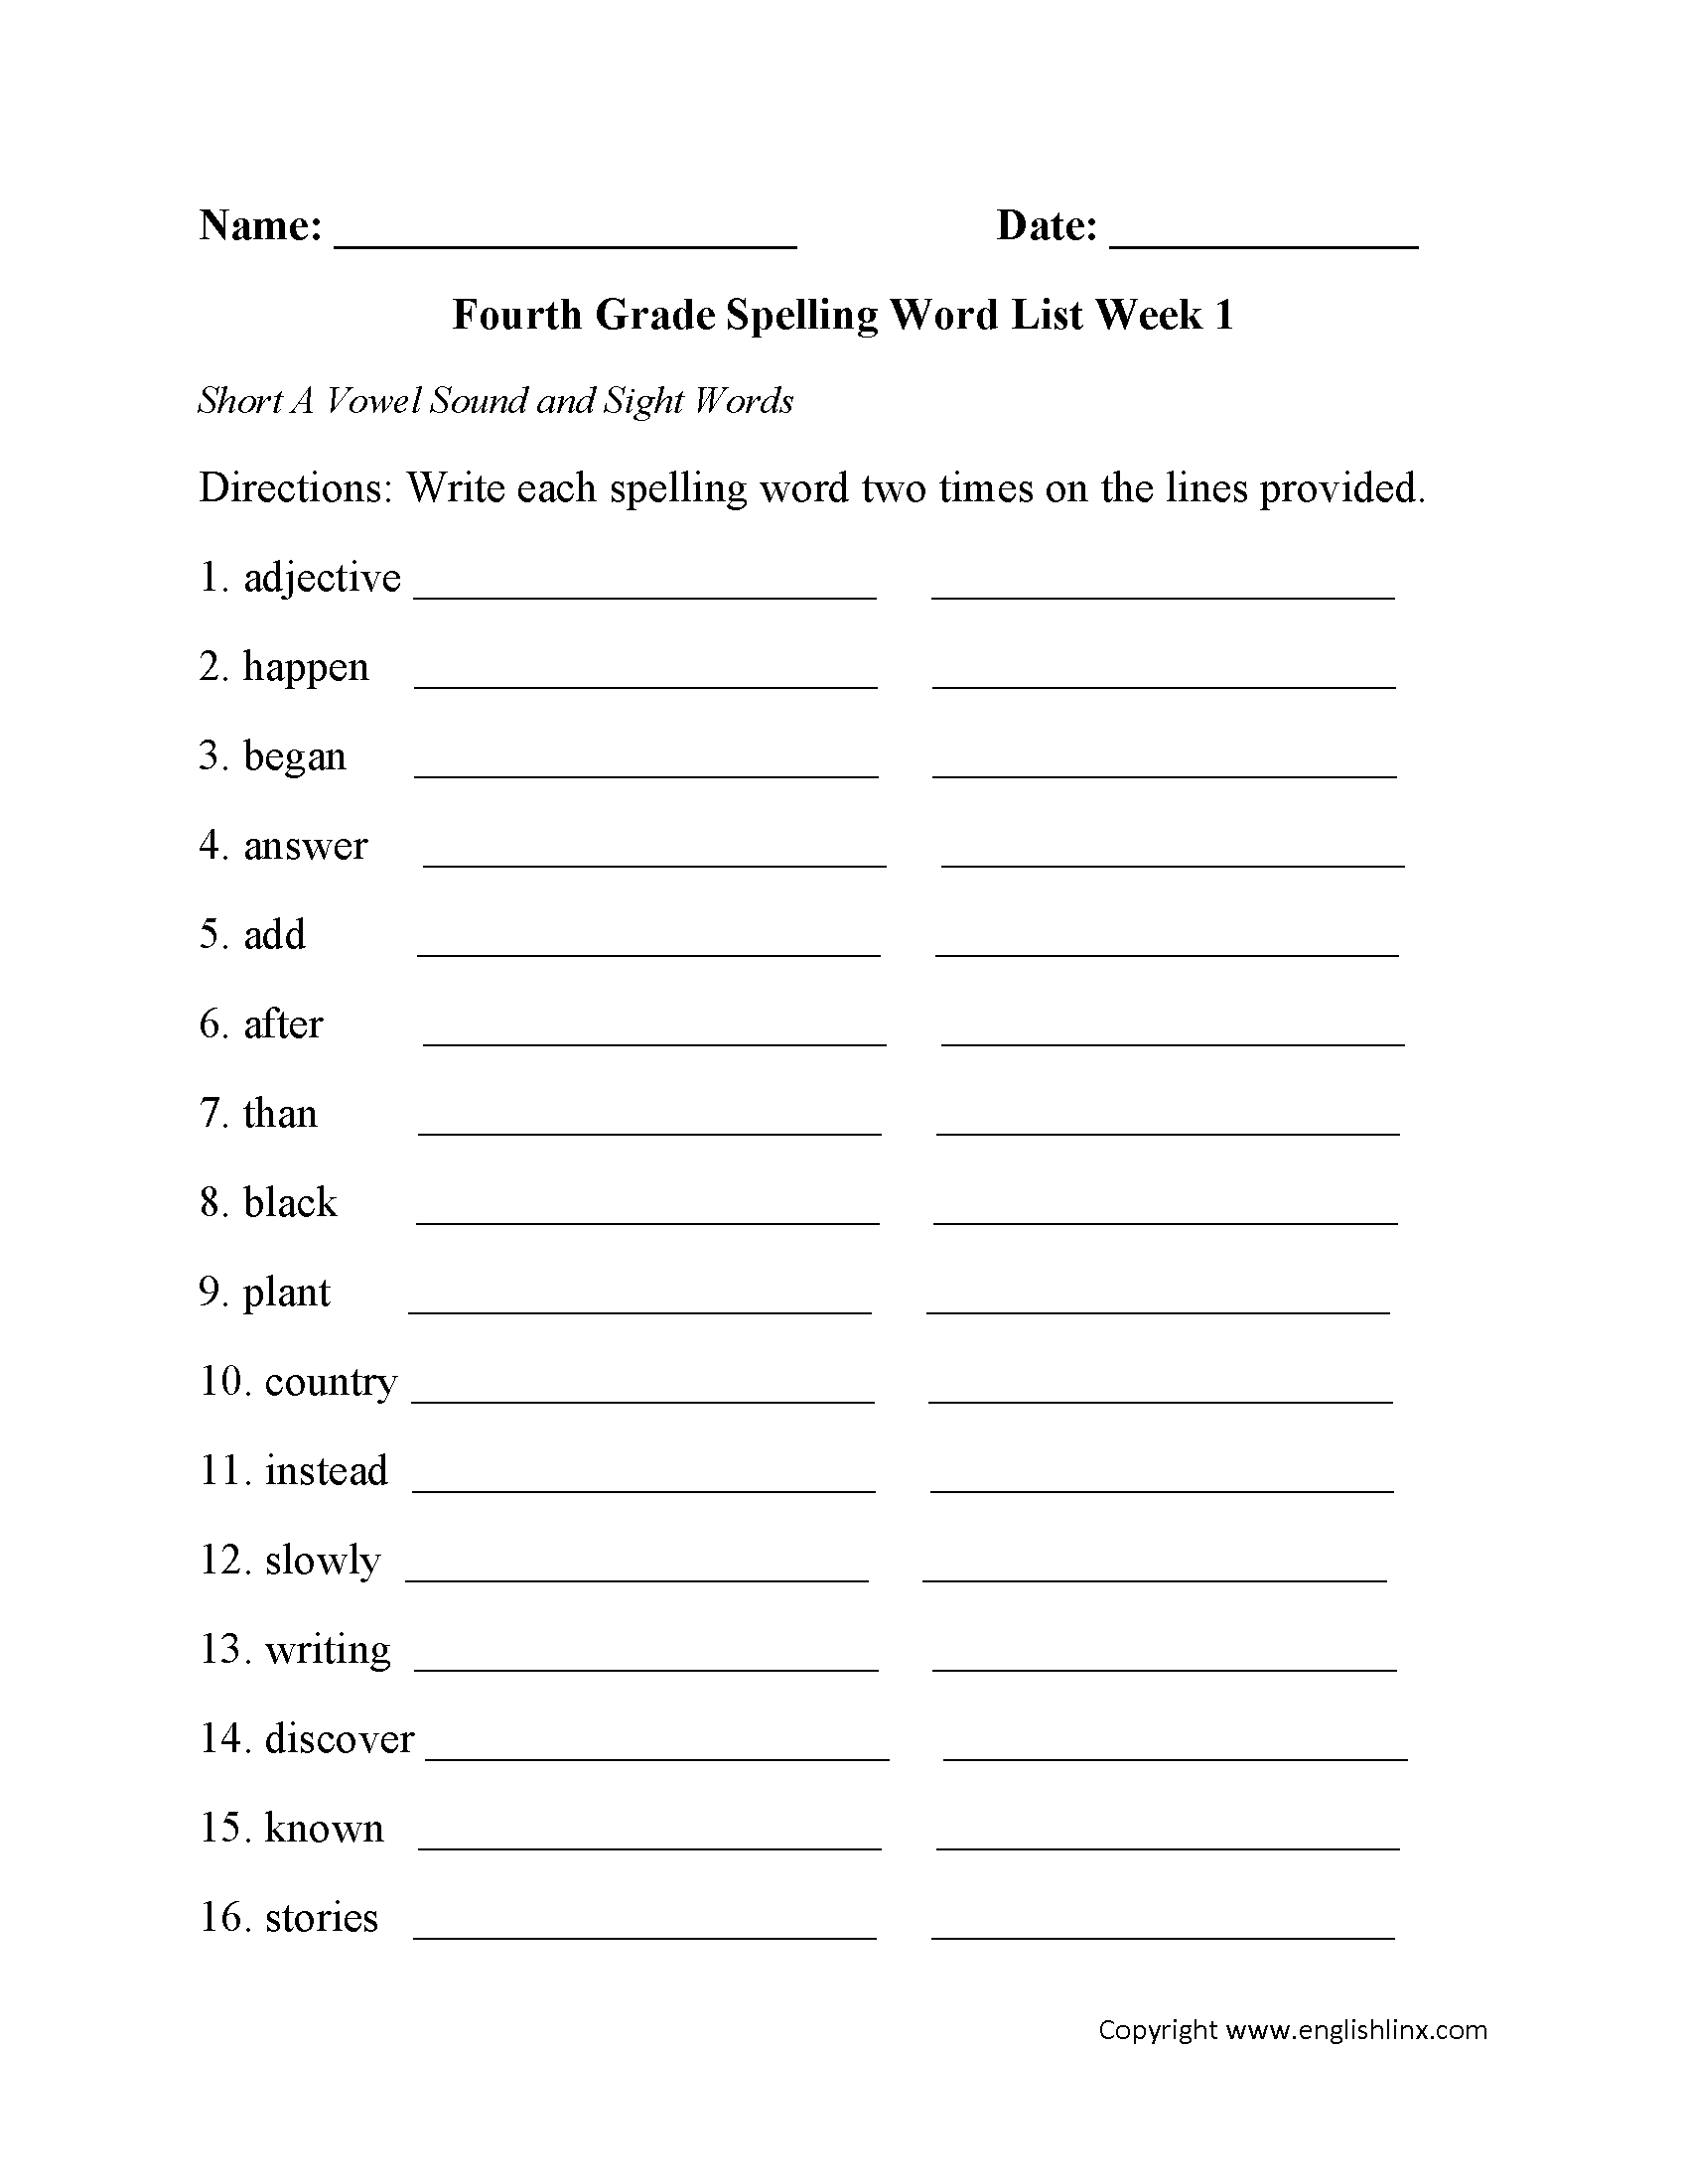 Week 1 Short A Vowel And Sight Words Fourth Grade Spelling Words Worksheets Grade Spelling 4th Grade Spelling Words Spelling Worksheets